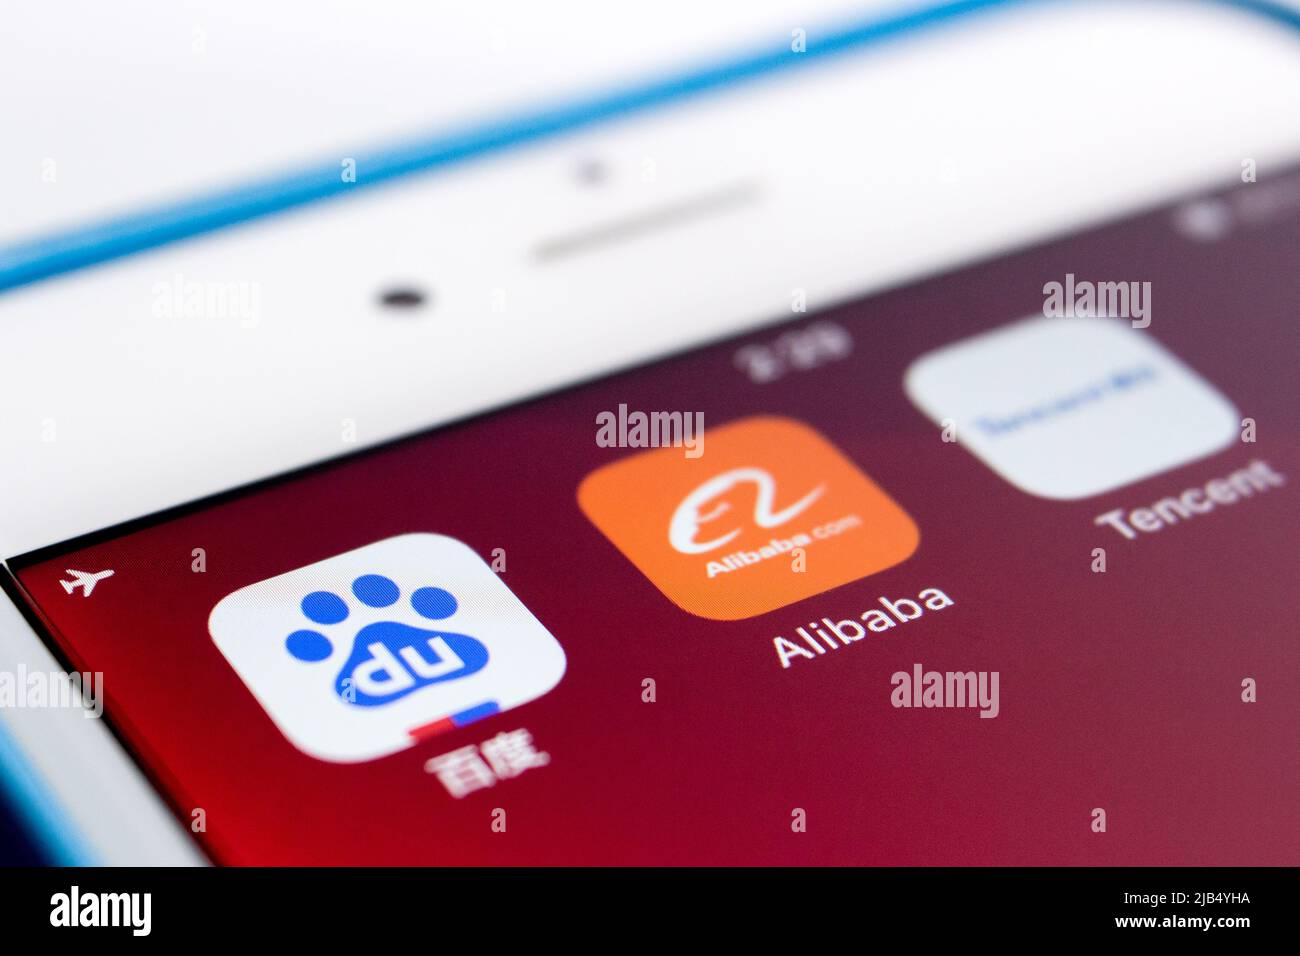 Close up of Alibaba logo, founded on 4 April 1999 in Hangzhou, Zhejiang, with Chinese big tech company logos (Baidu, Tencent and Huawei) on an iPhone. Stock Photo